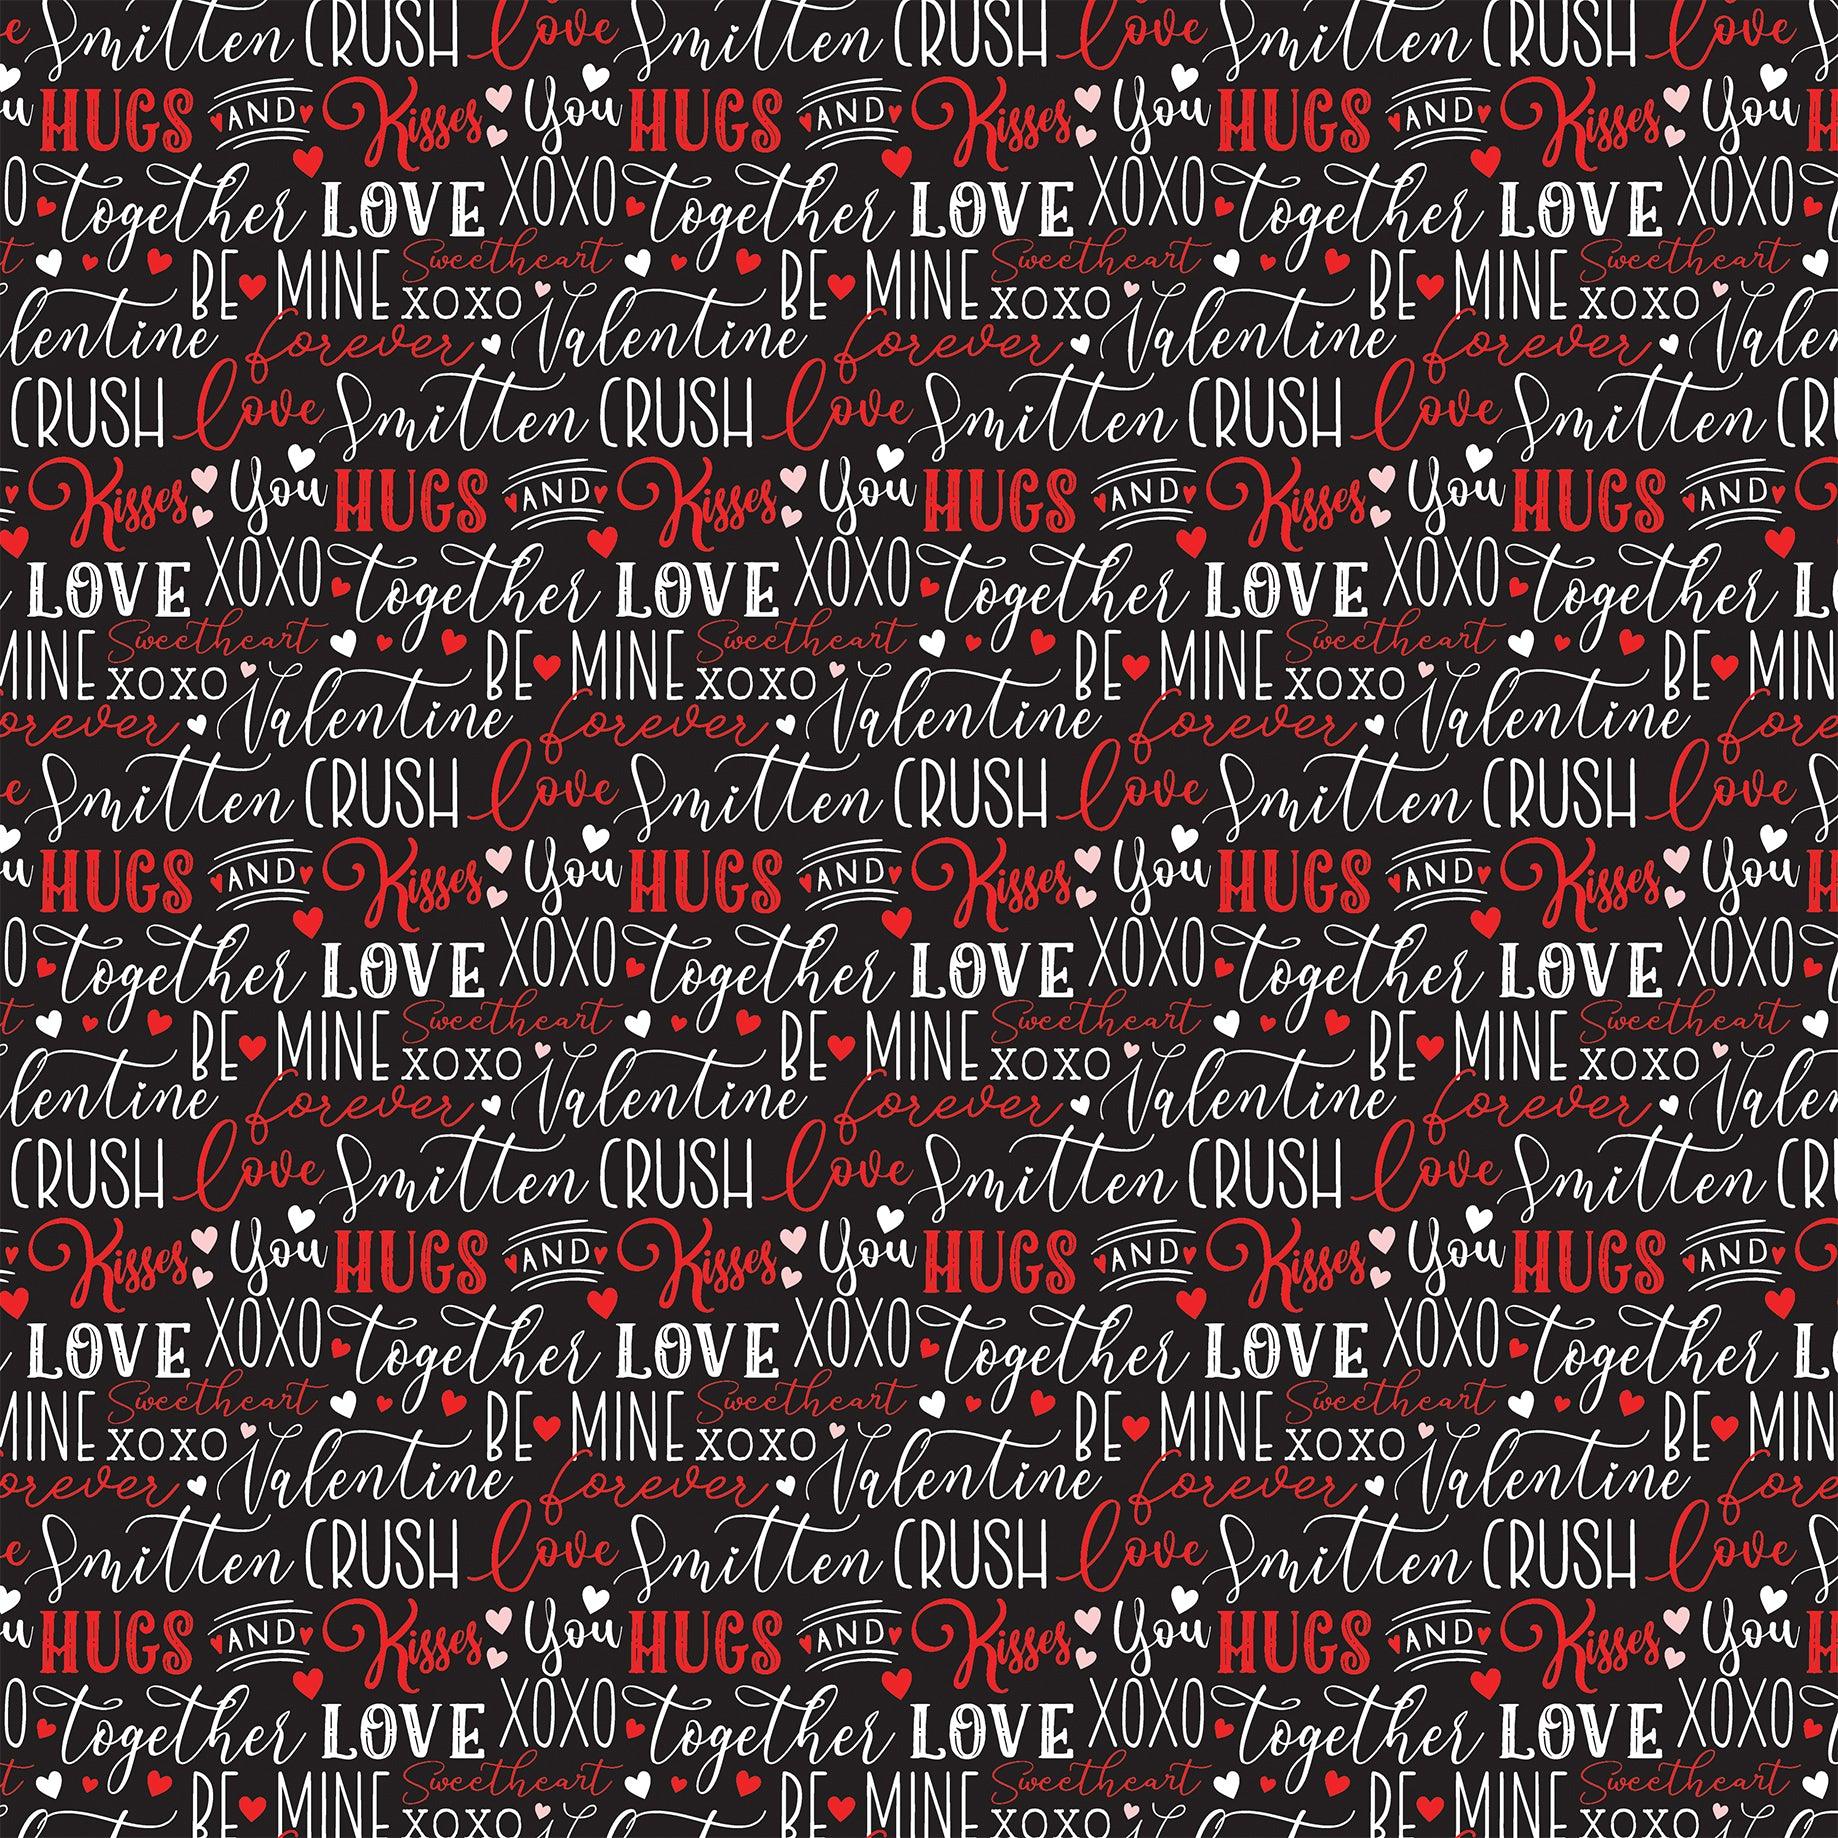 Cupid & Co Collection Love Words 12 x 12 Double-Sided Scrapbook Paper by Echo Park Paper - Scrapbook Supply Companies